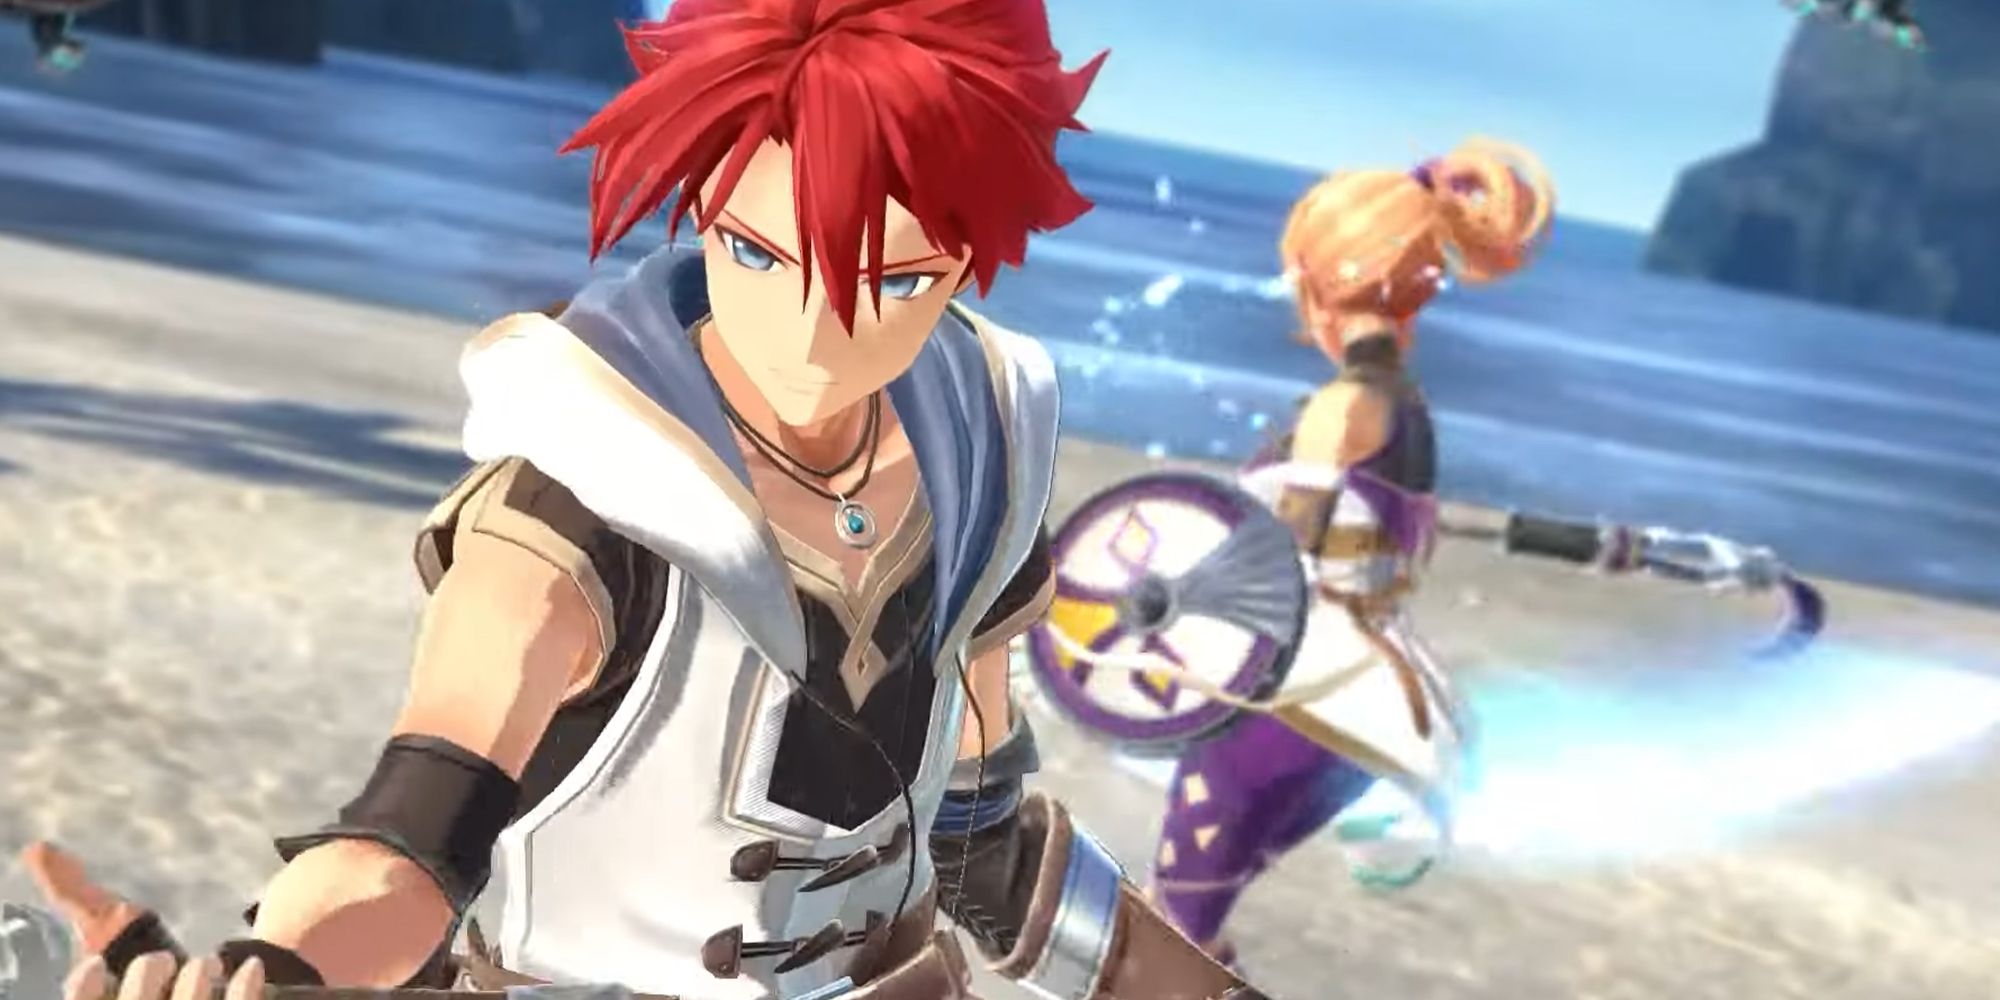 Ys 10 protagonists standing back to back on a beach